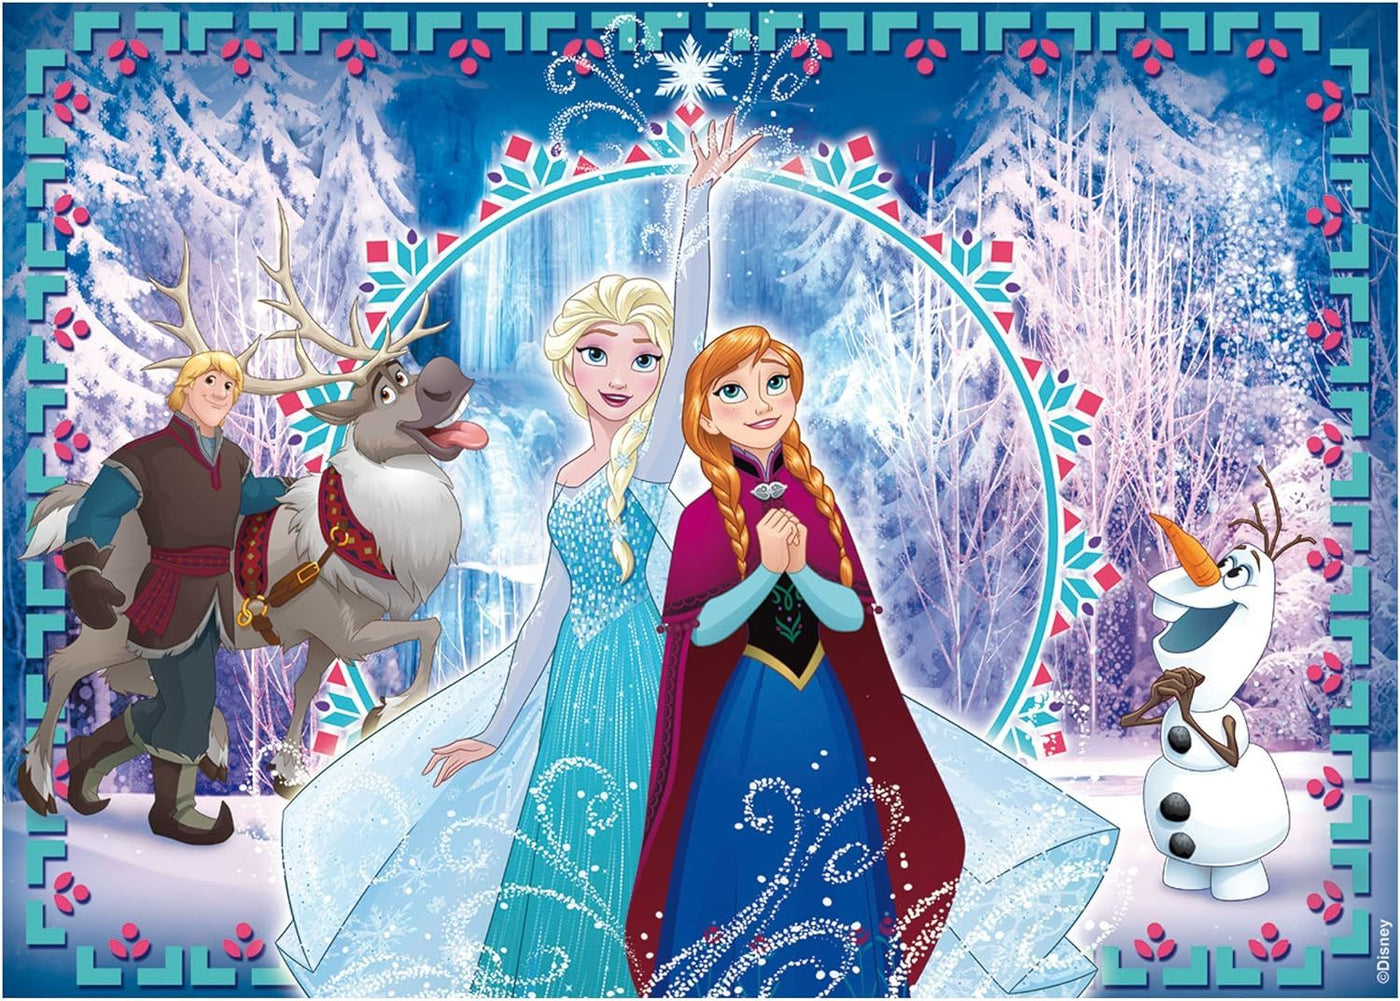 Frozen Double Sided 250 pc Puzzle